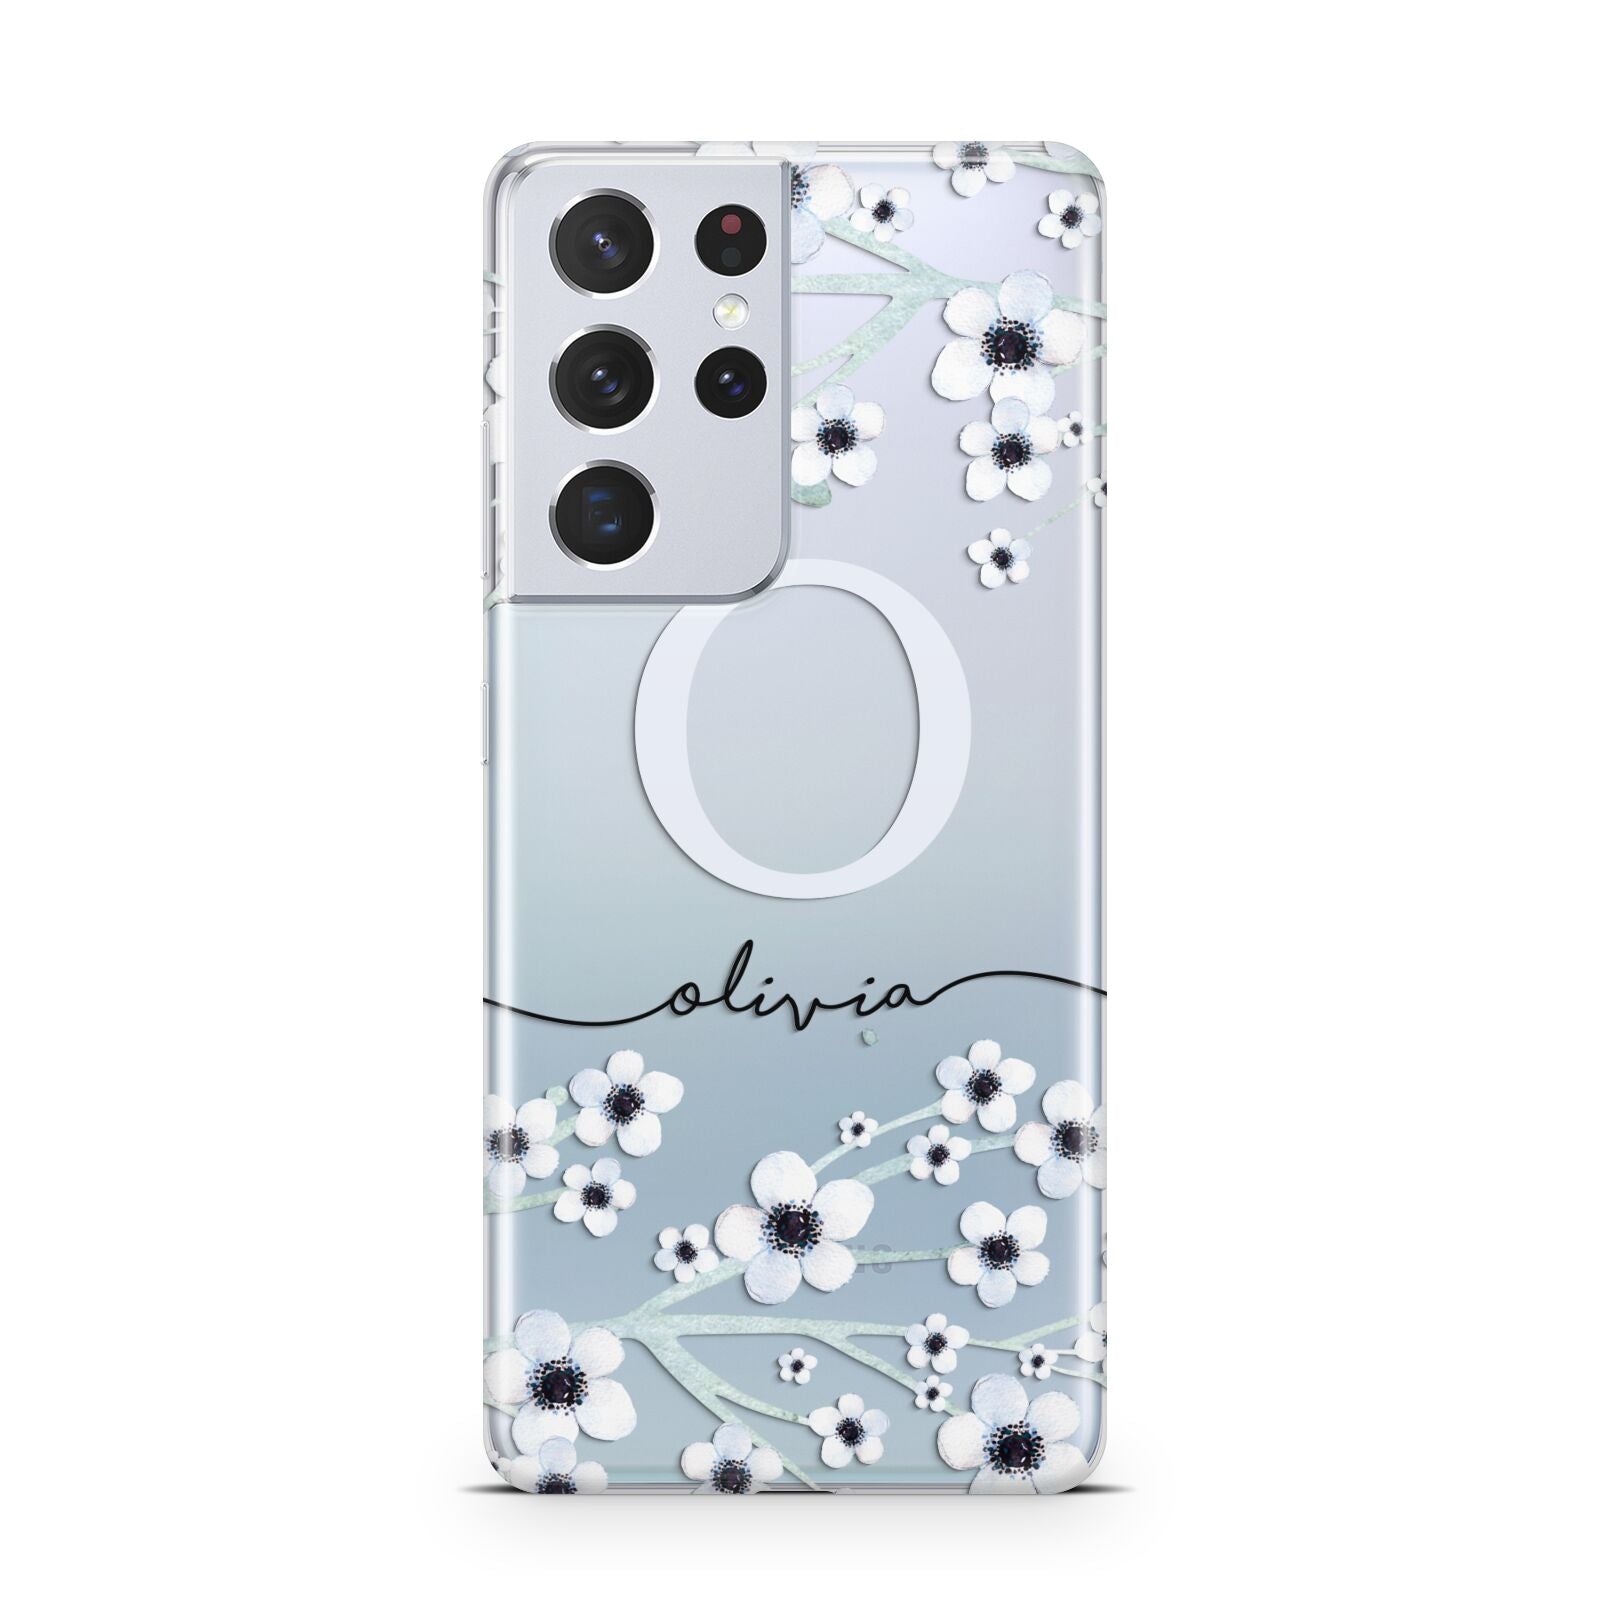 Personalised White Flower Samsung S21 Ultra Case